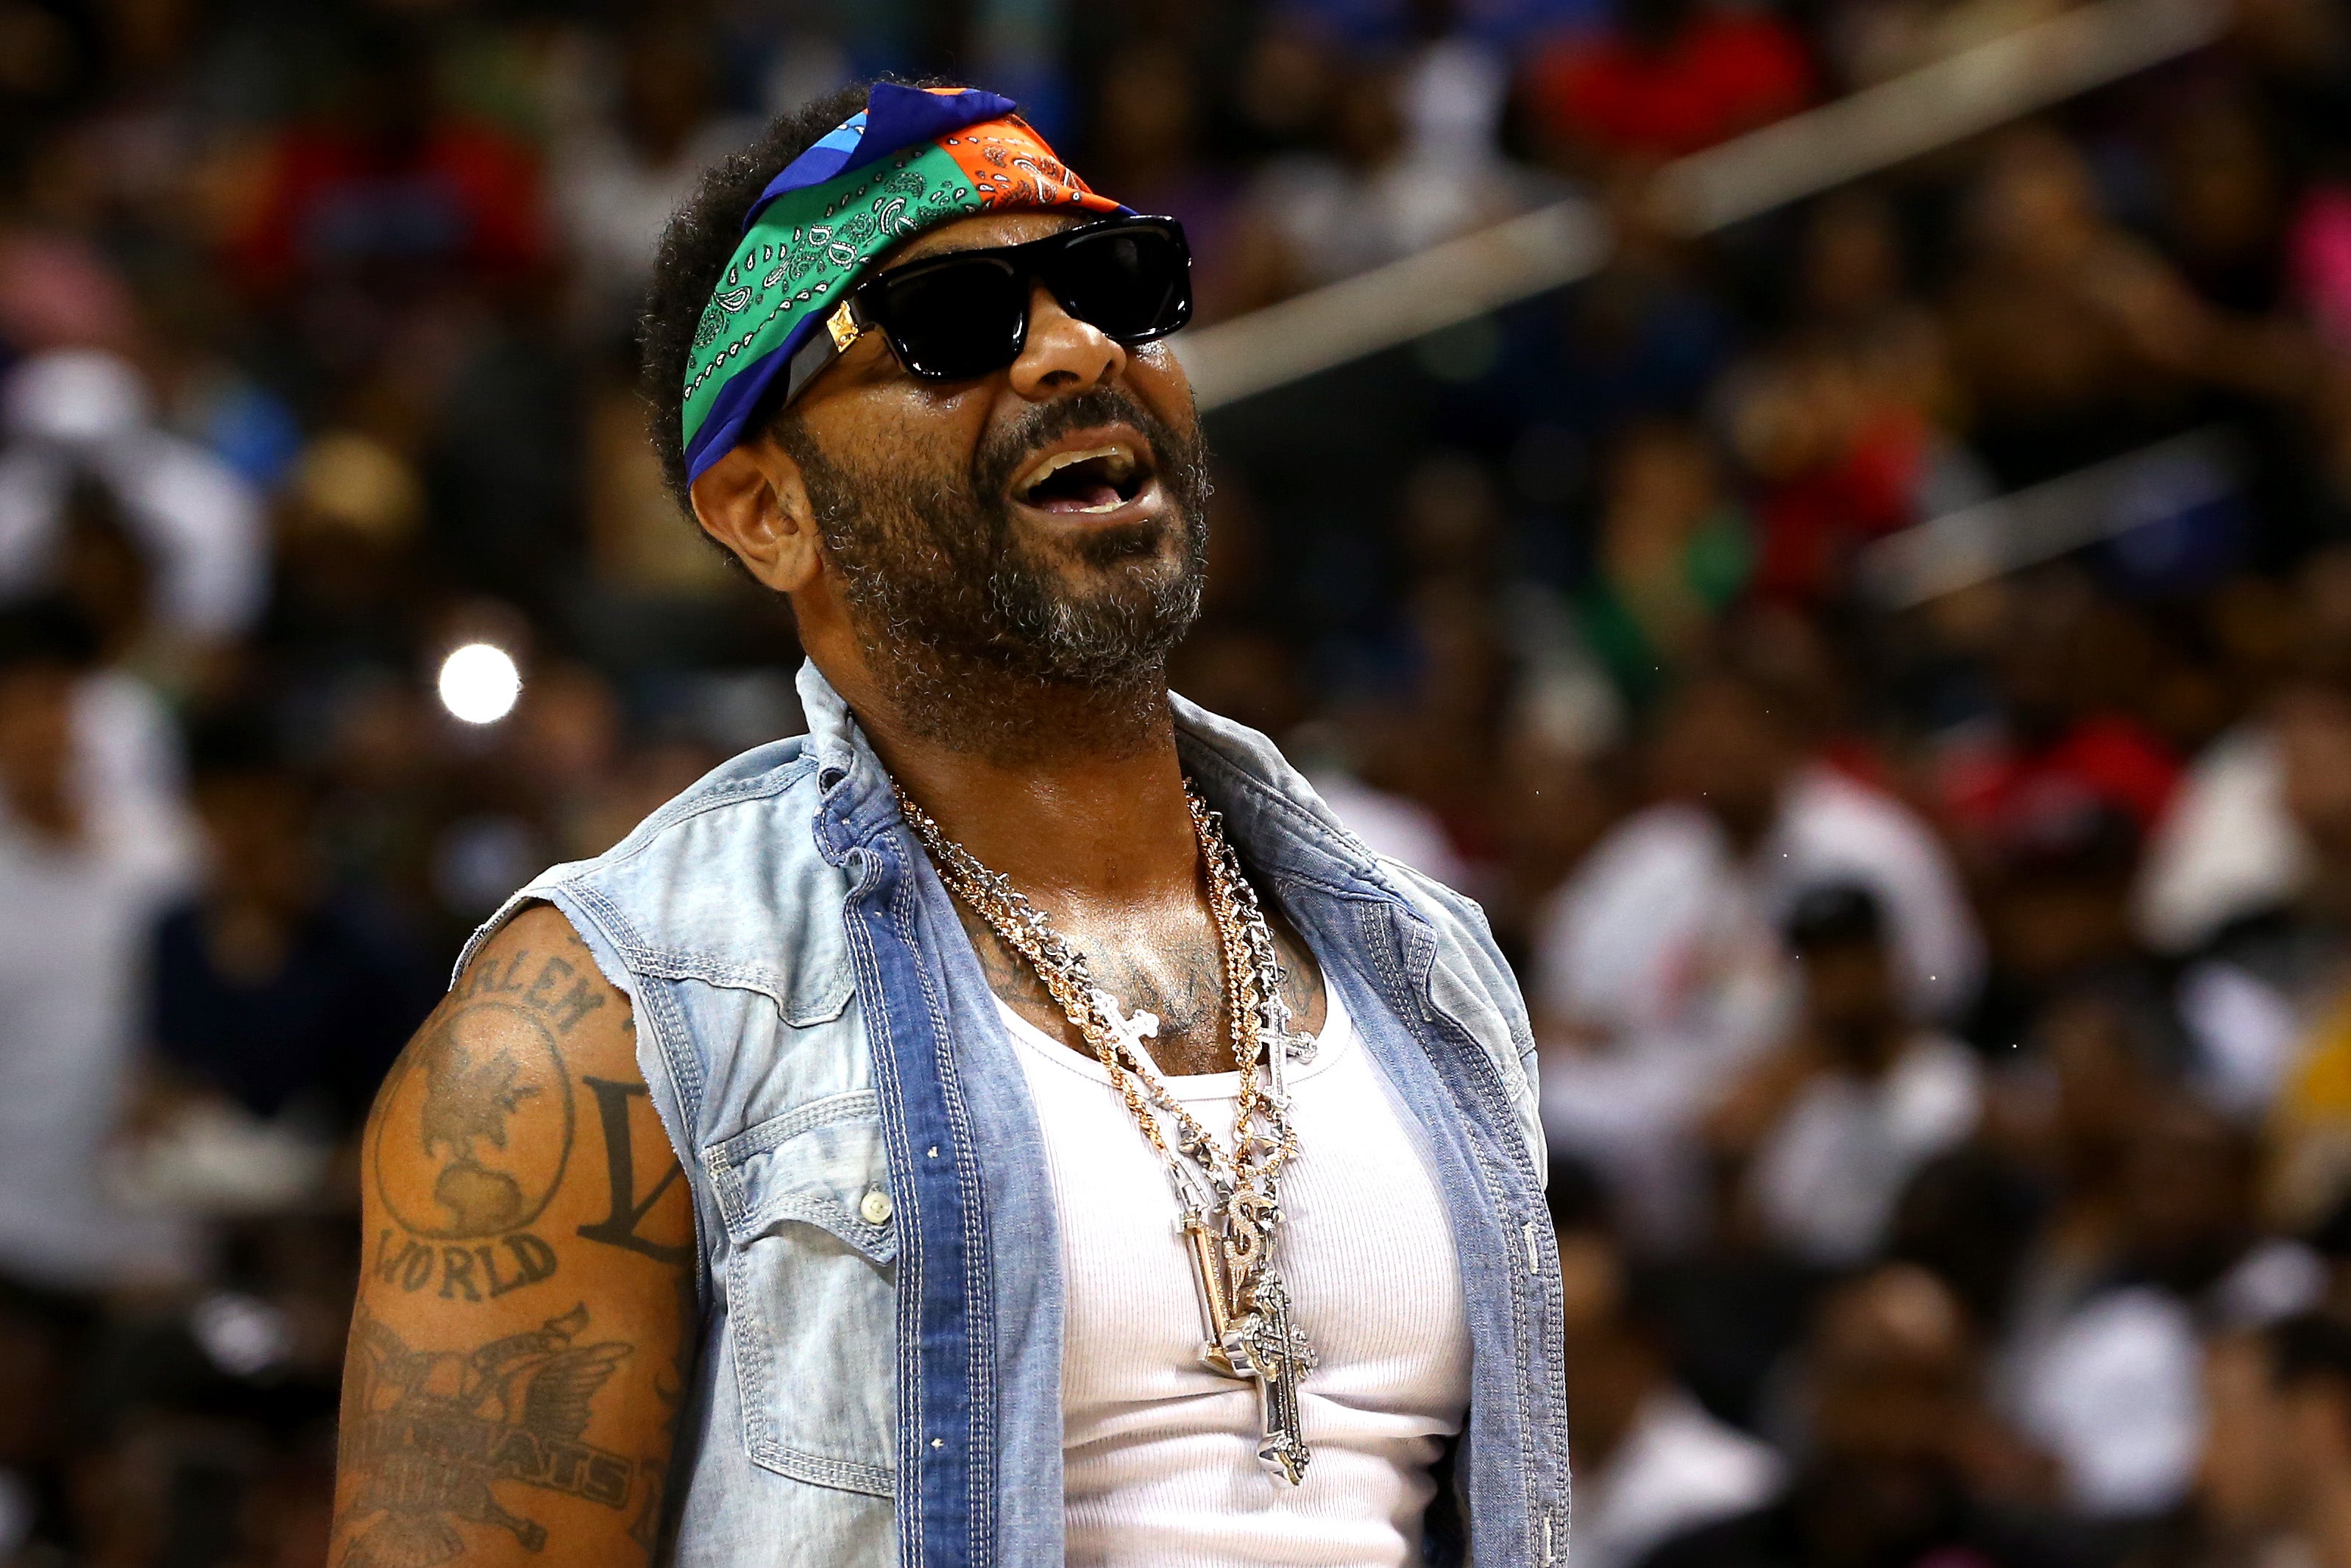 Rapper Jim Jones performs during week four of the BIG3 three-on-three basketball league at Barclays Center on July 14, 2019 in the Brooklyn borough of New York City.